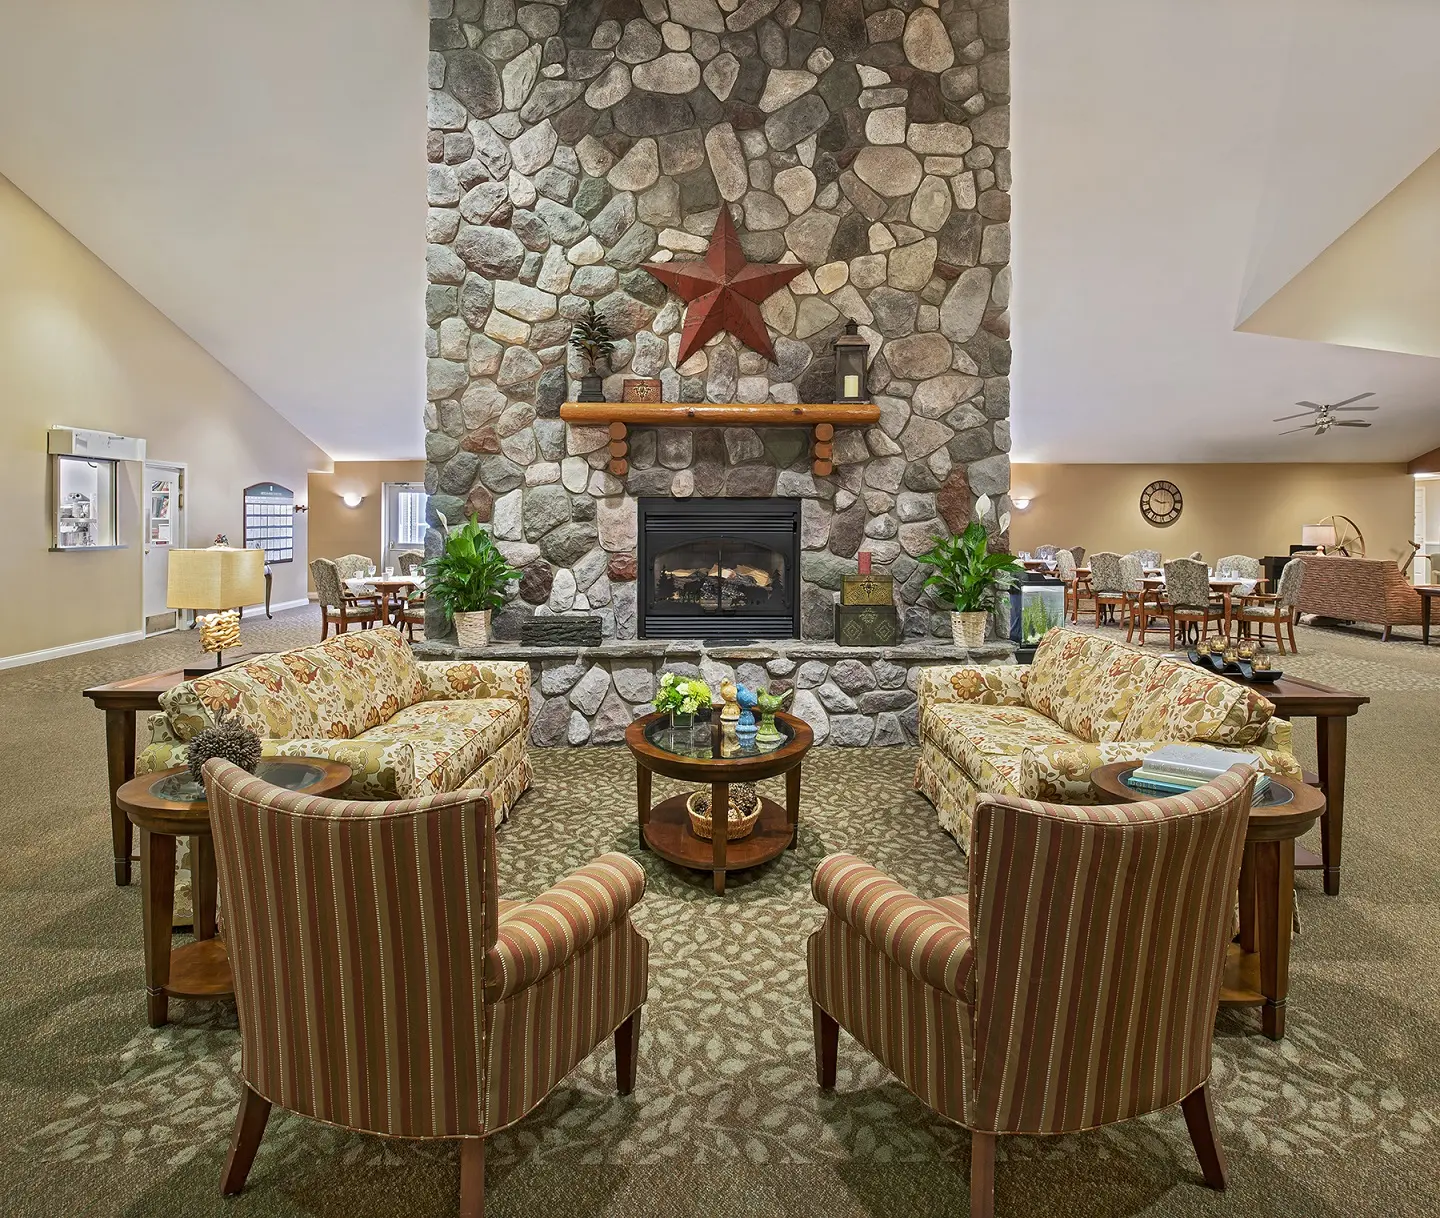 Fireplace / common area of American House Charlevoix, a senior living community in Charlevoix, Michigan